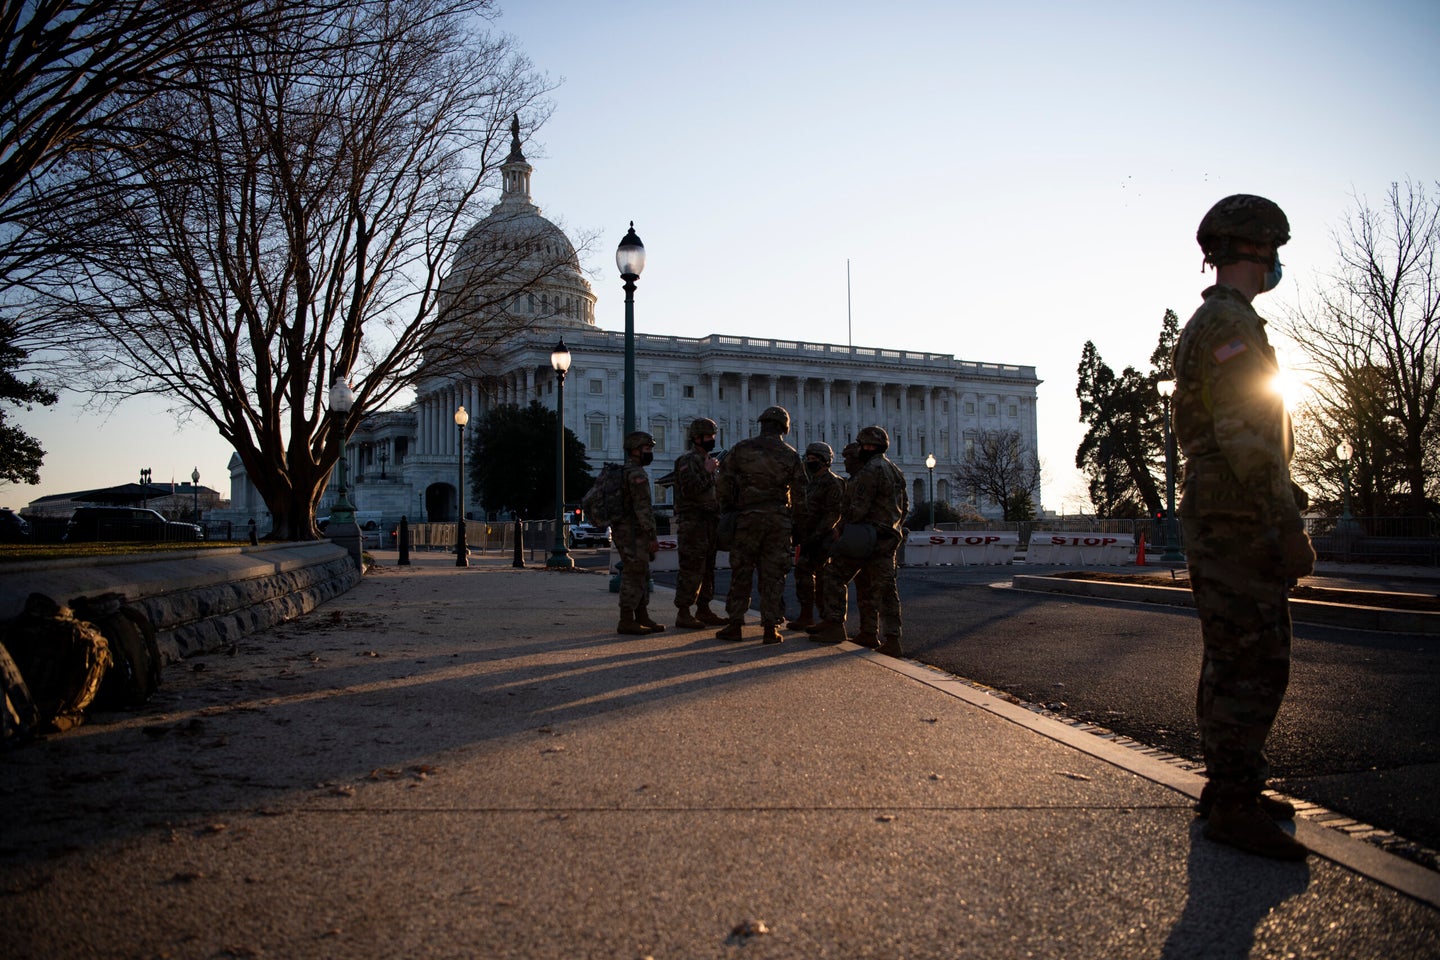 UNITED STATES - January 12: Members of the National Guard stand watch on the East Front of the Capitol in Washington on Tuesday, Jan. 12, 2021. (Photo by Caroline Brehman/CQ Roll Call via AP Images)